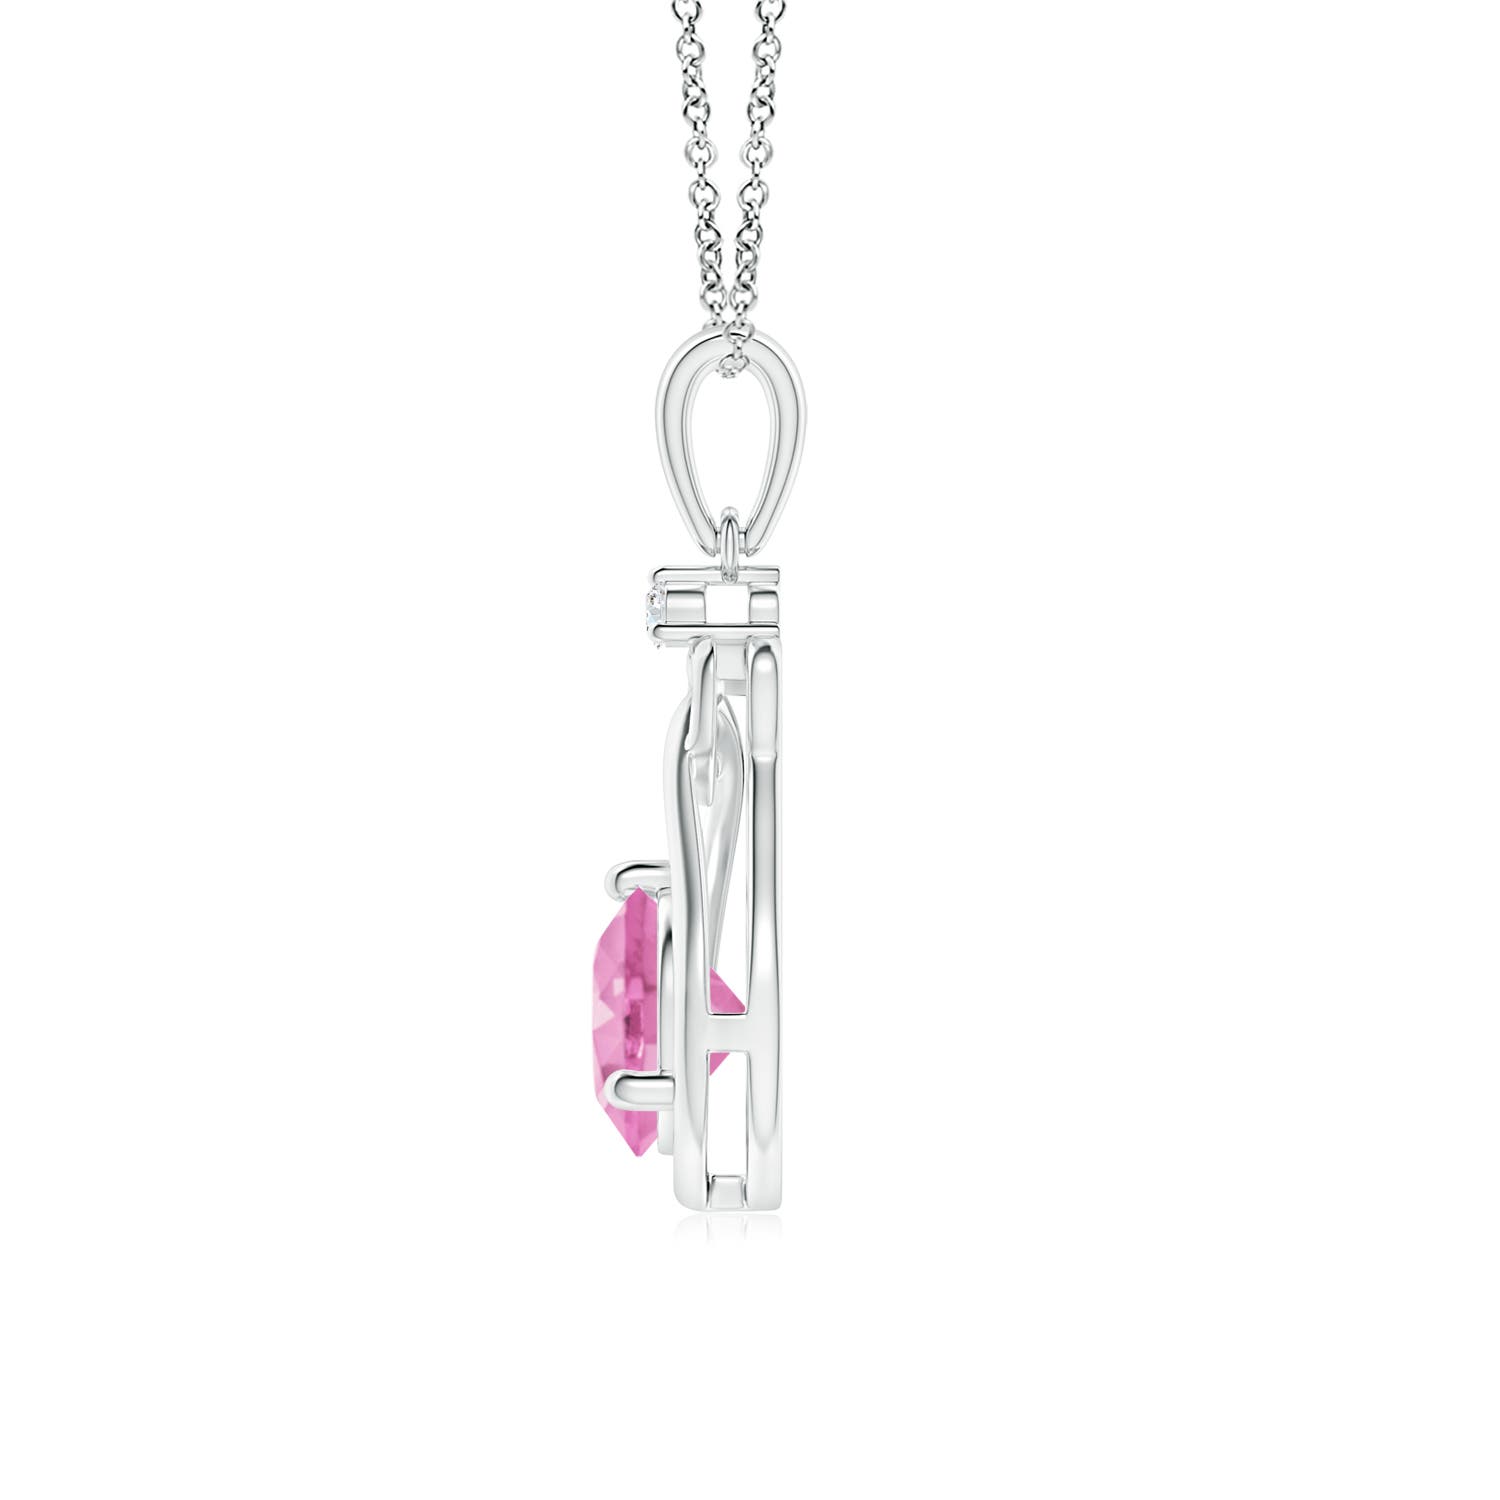 A - Pink Sapphire / 1.01 CT / 14 KT White Gold